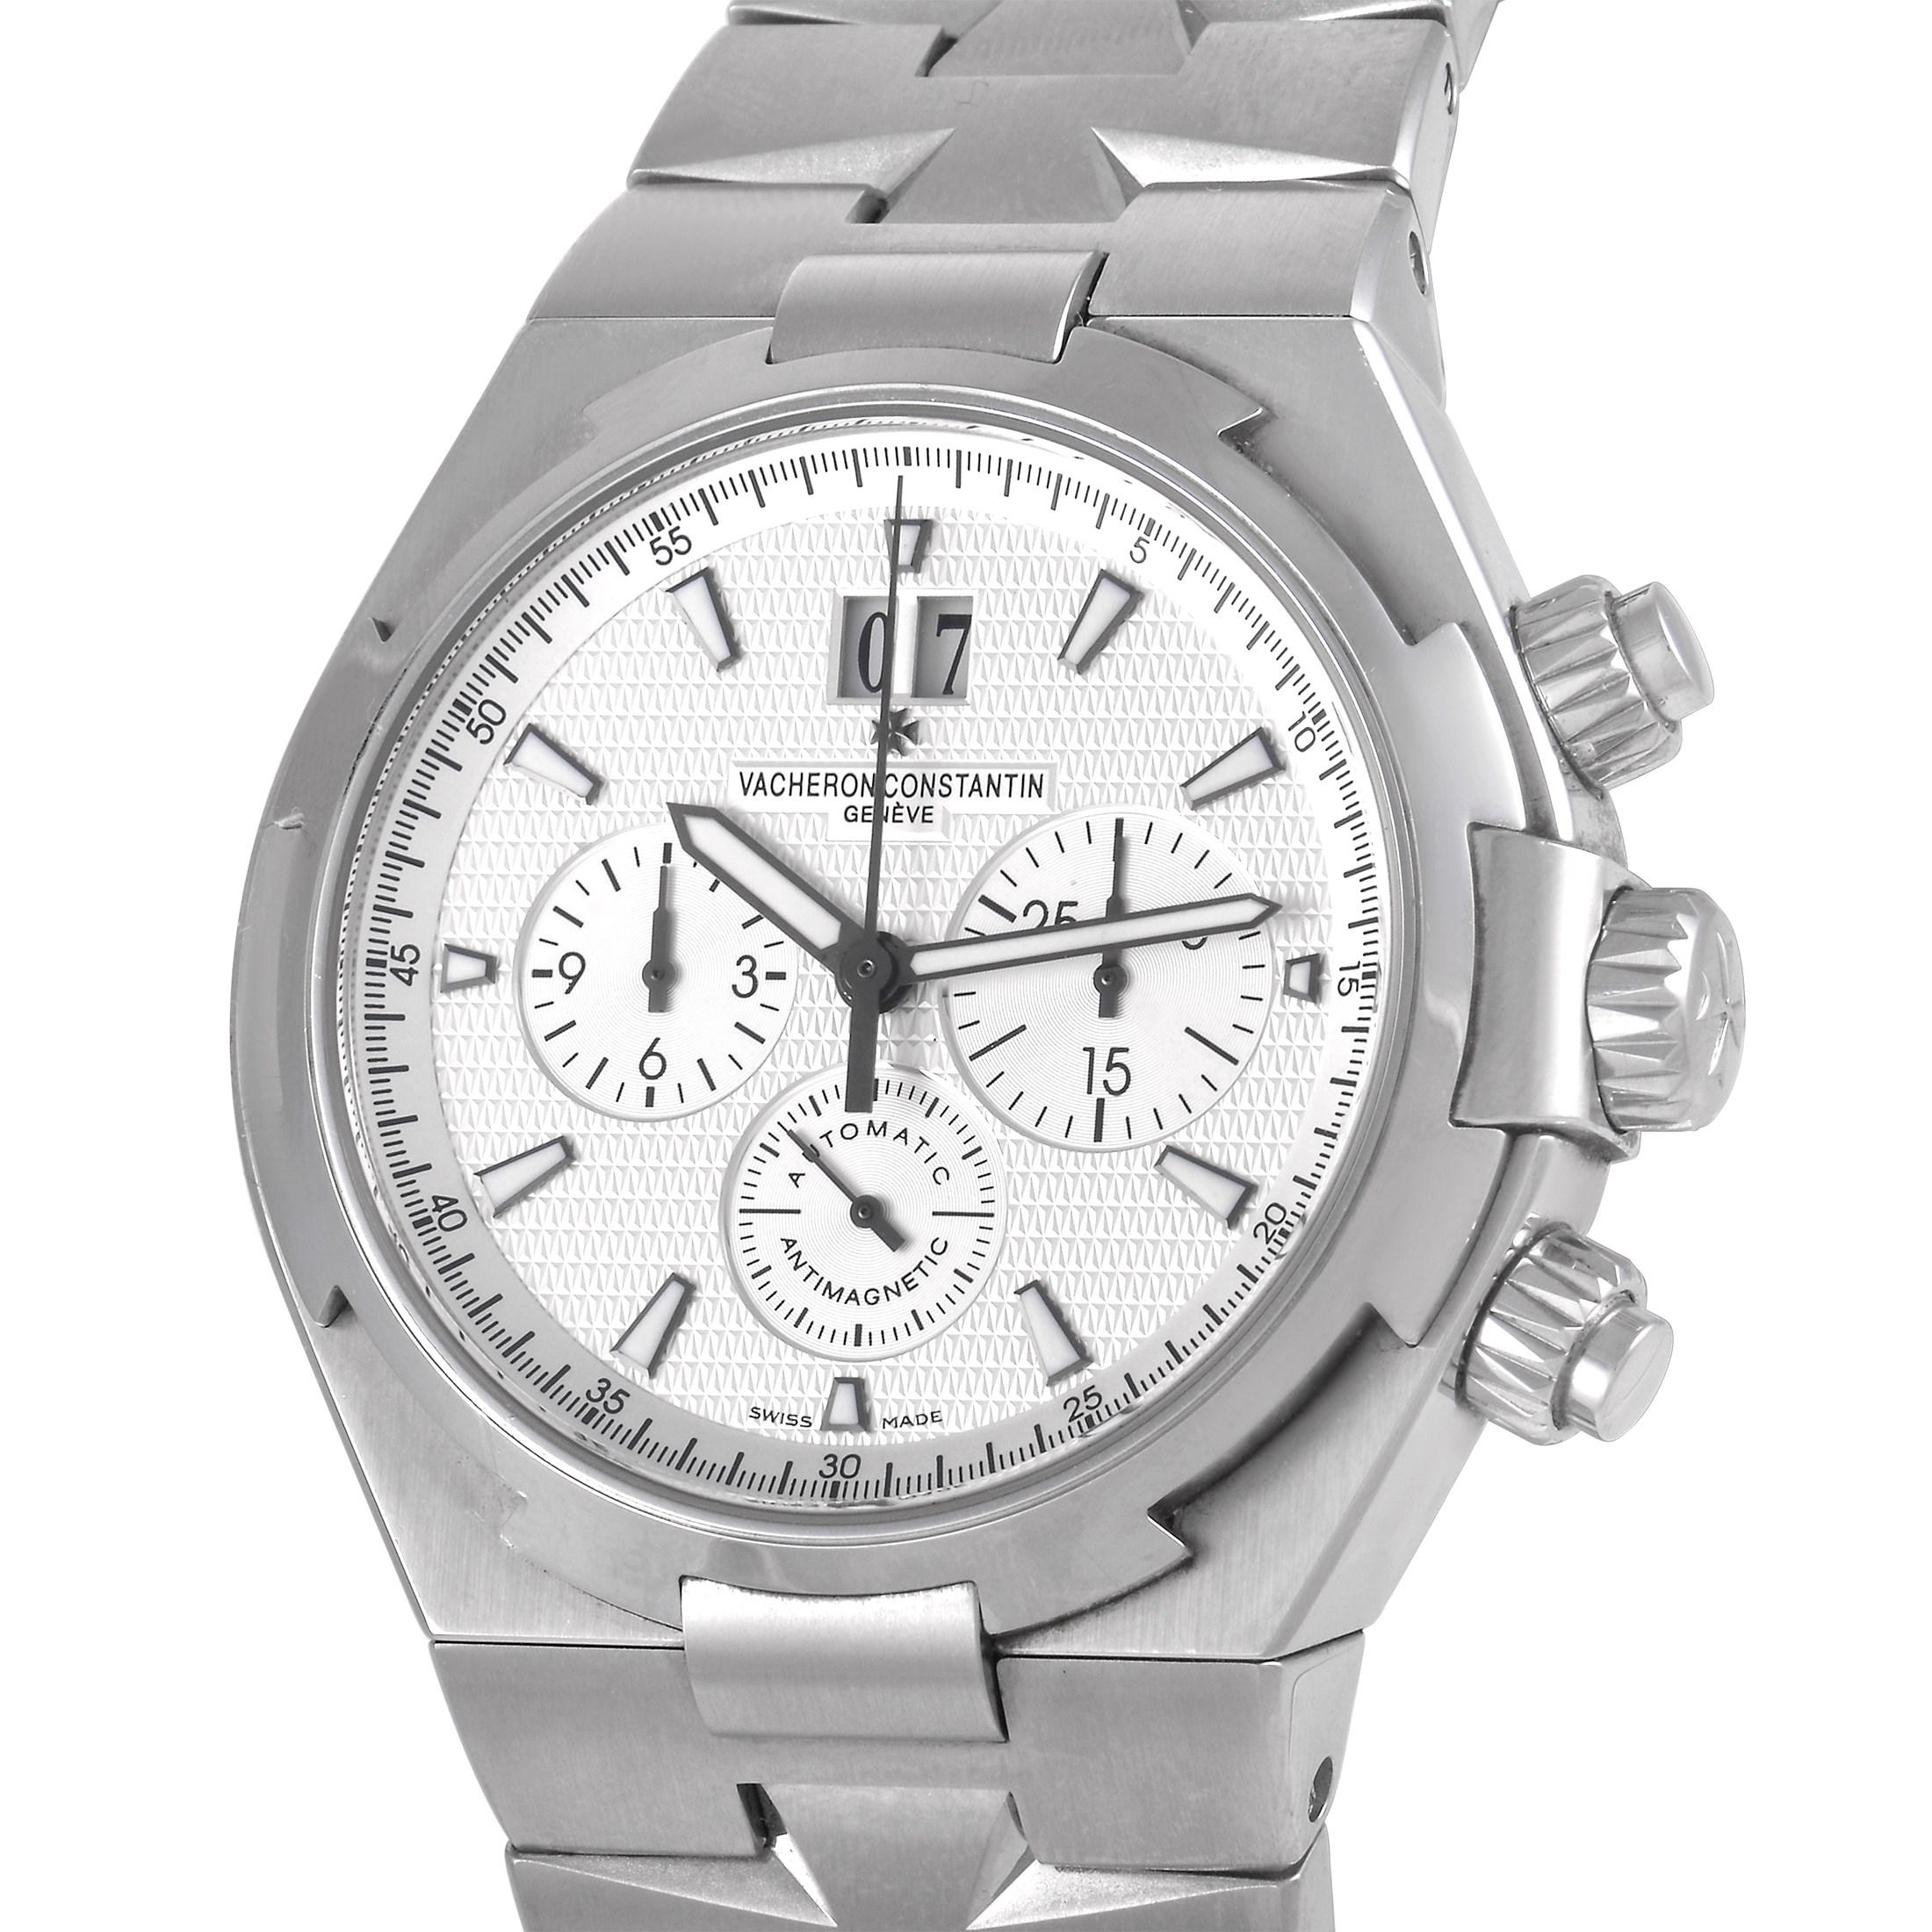 The Vacheron Constantin Overseas Chronograph Watch, reference number 49150/BO1A, is a luxury piece that puts functionality at the forefront.

This exceptional timepiece features a 42mm case, bezel, and bracelet made from solid stainless steel. The